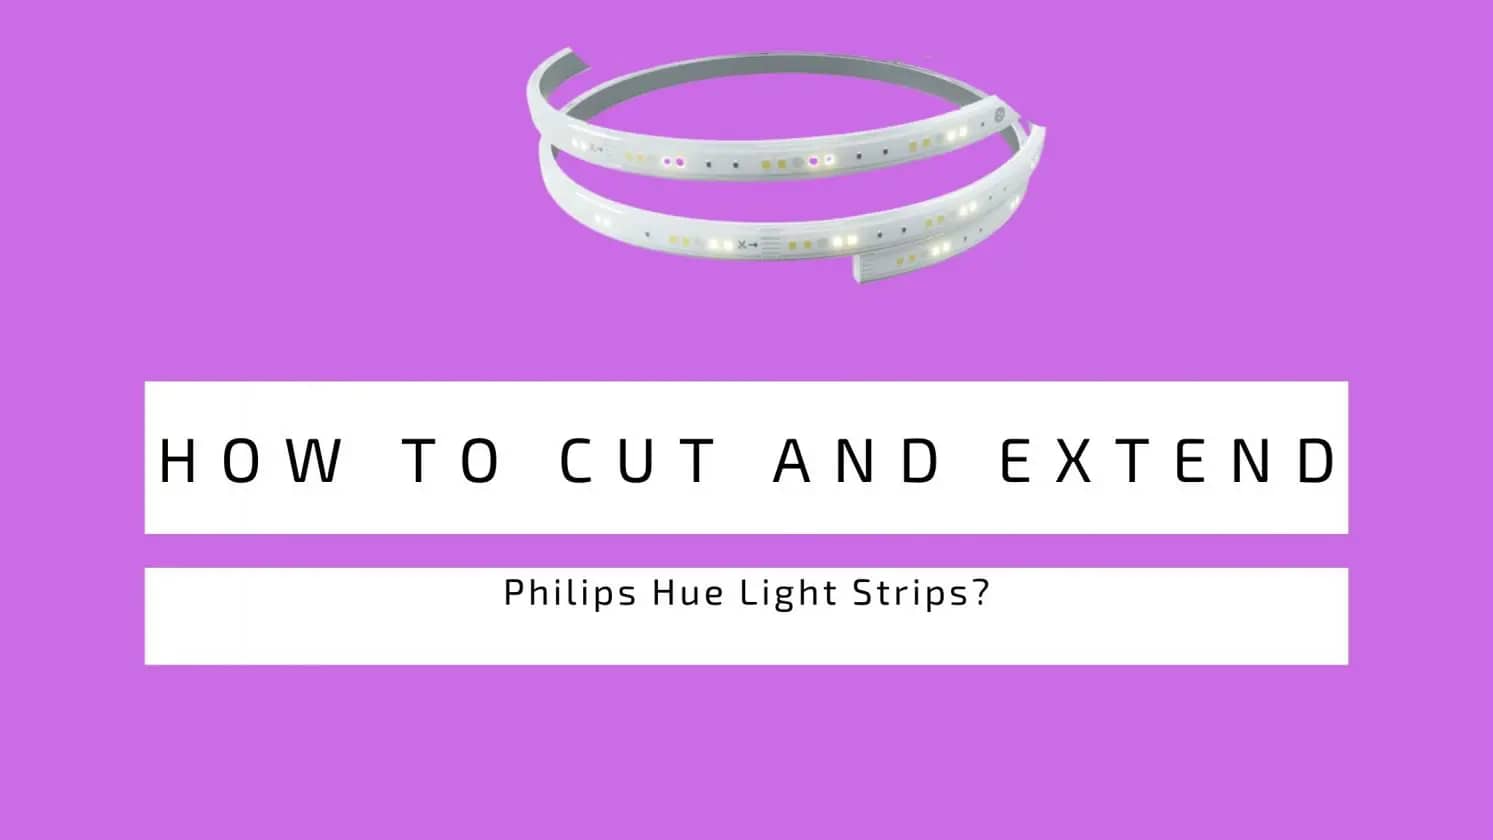 How To Cut And Extend Philips Hue Light Strips?